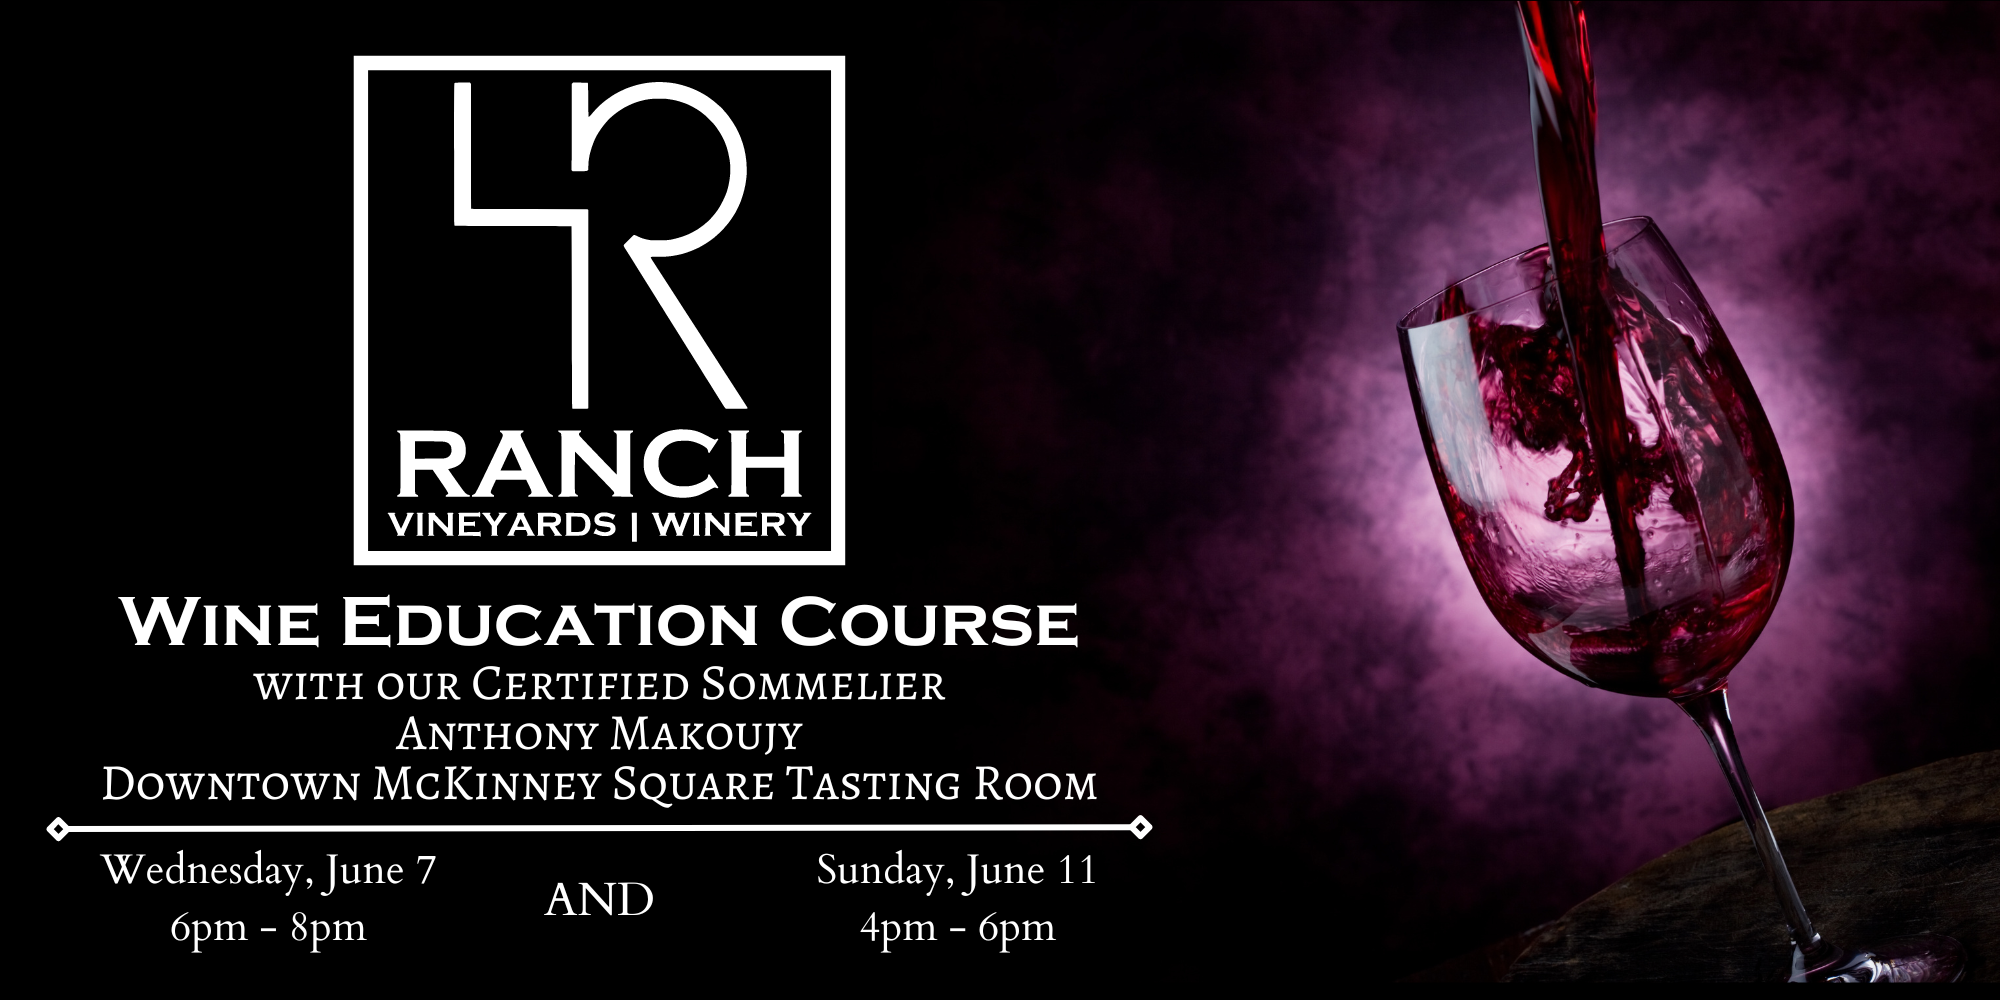 Wine Education Course at 4R in Downtown McKinney. Wednesday, June 7 from 6 to 8 pm and Sunday, JUne 11 from 4 to 6 pm